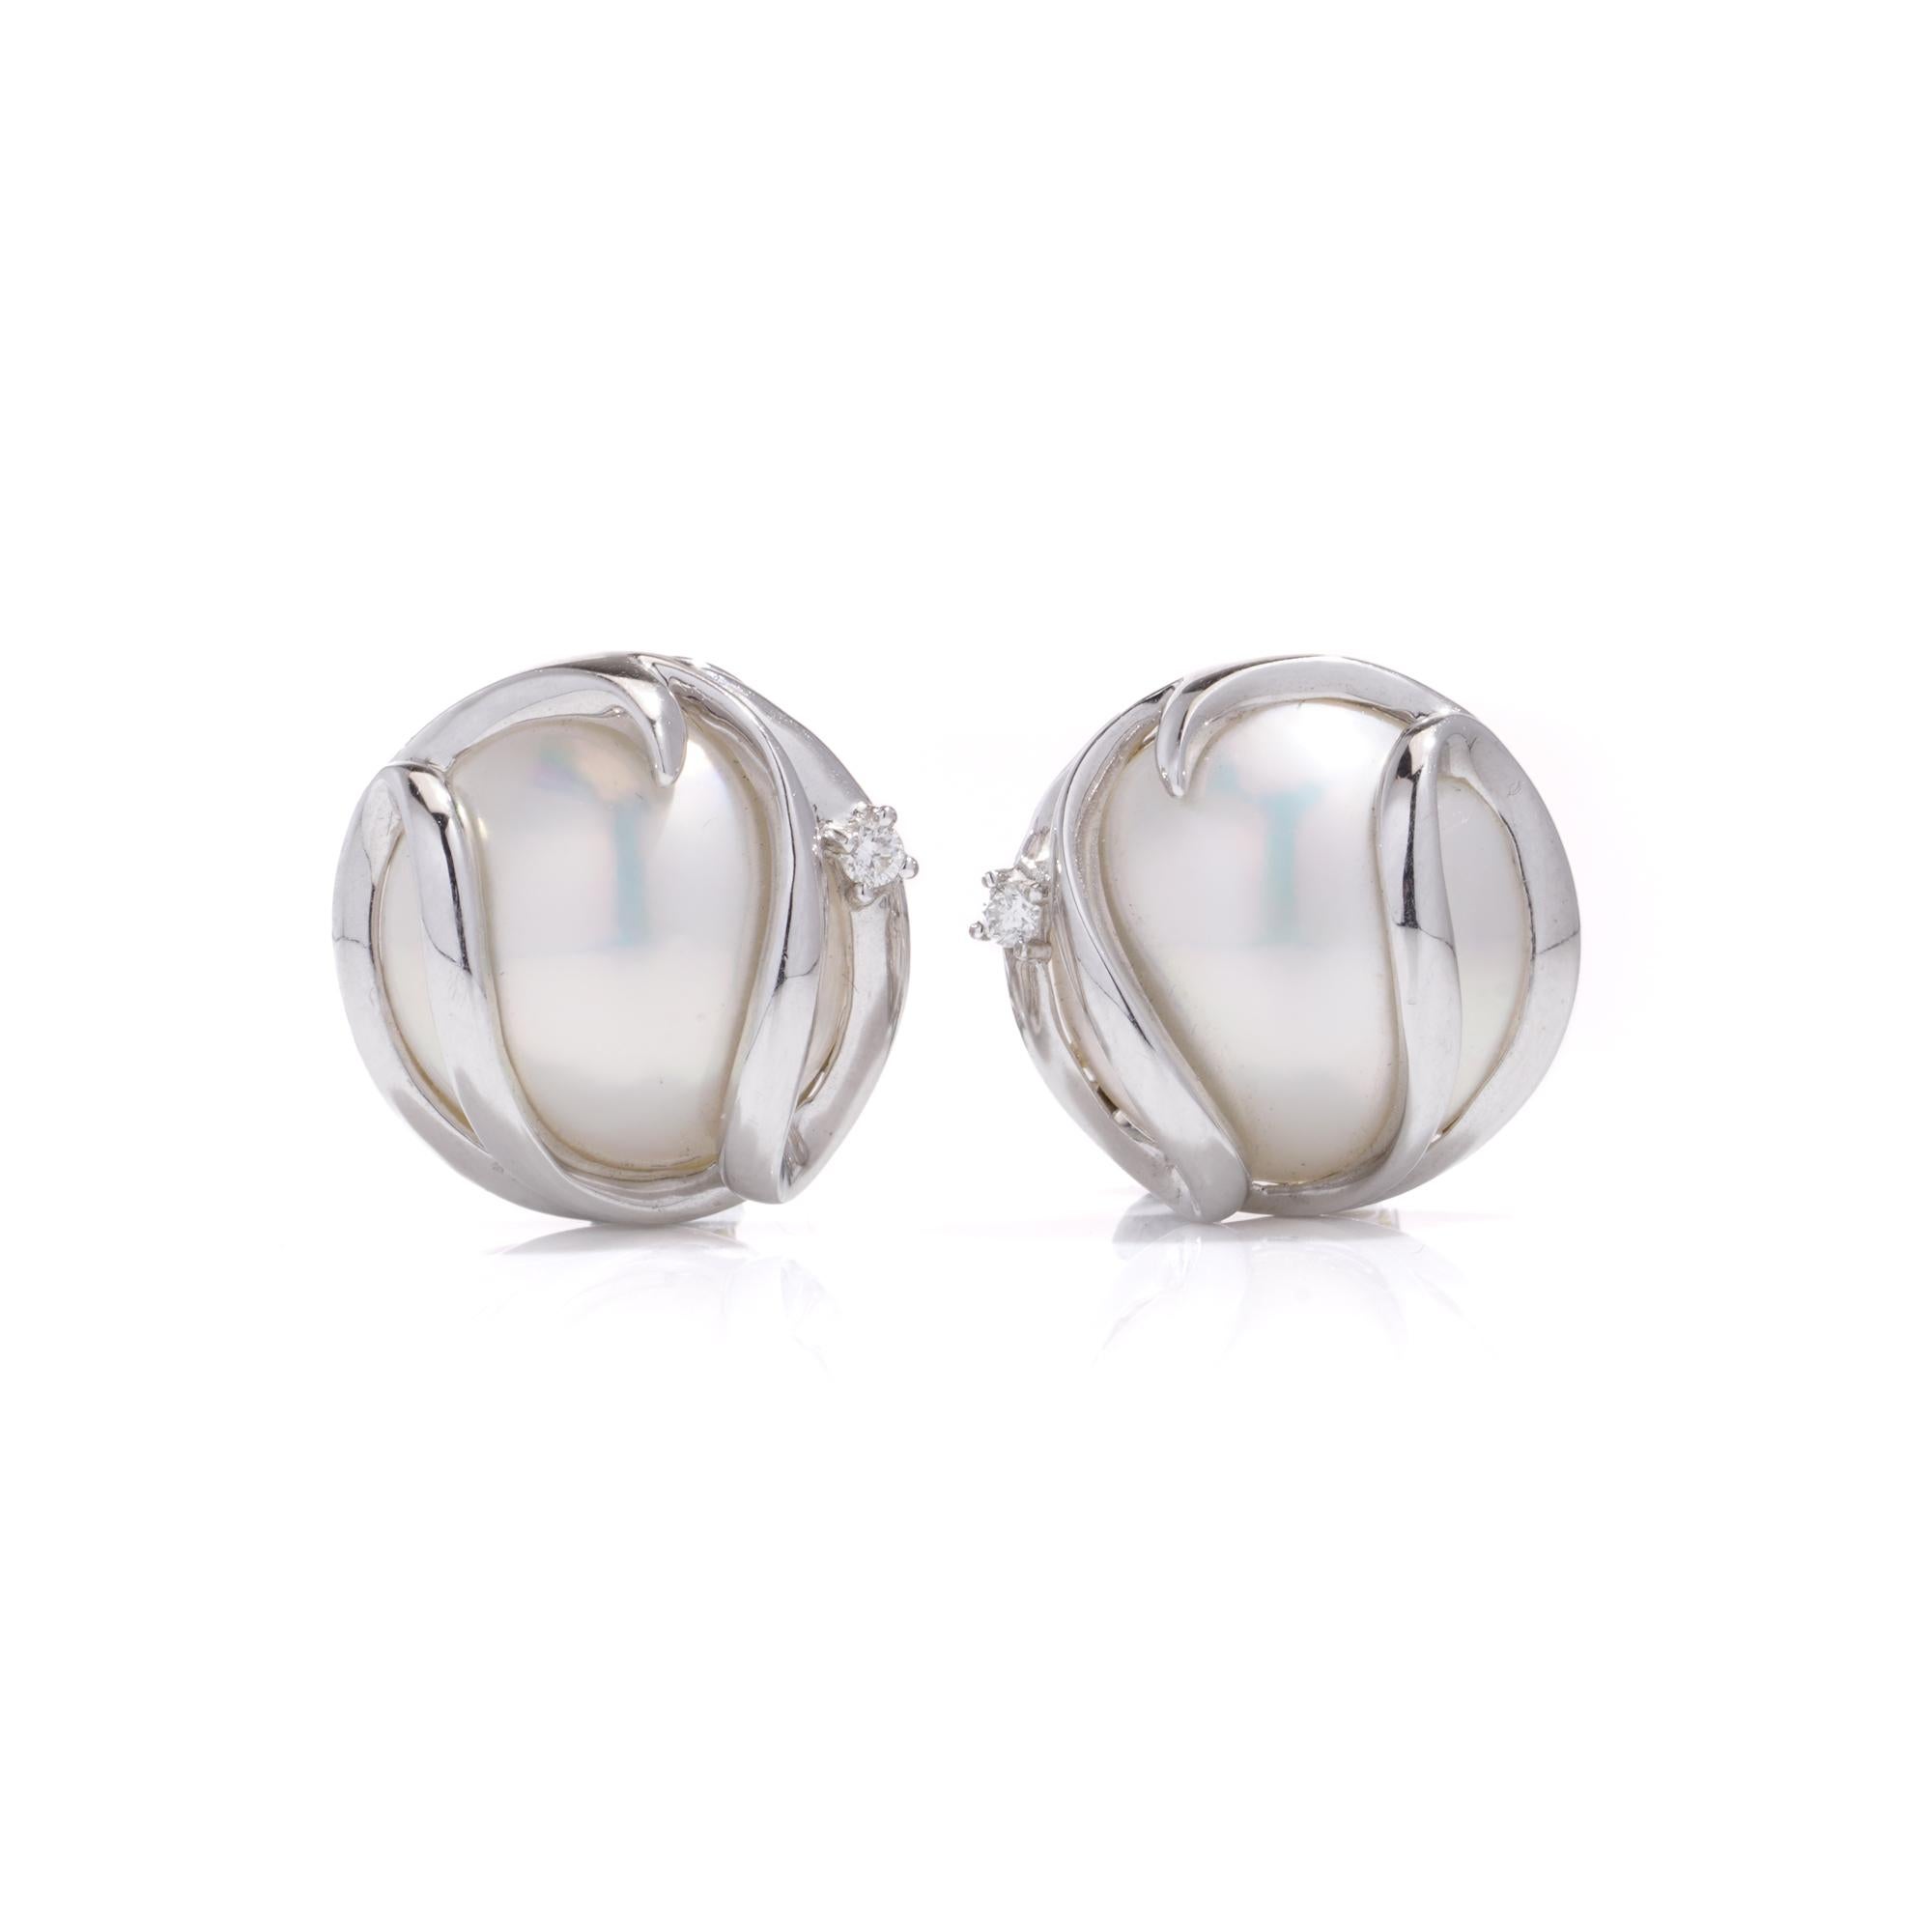 Vintage 14kt white gold pair of Mabe pearl and diamond earrings. 
Bezel set. 
Made in 1990s 
X - ray tested positive for 14kt gold. 

Cultured Mabe pearls - 
Quantity: 2 
Size: 14 mm
Pearl Oyster: Pinctada Maxima
Pearl bodycolour: White 
Pearl